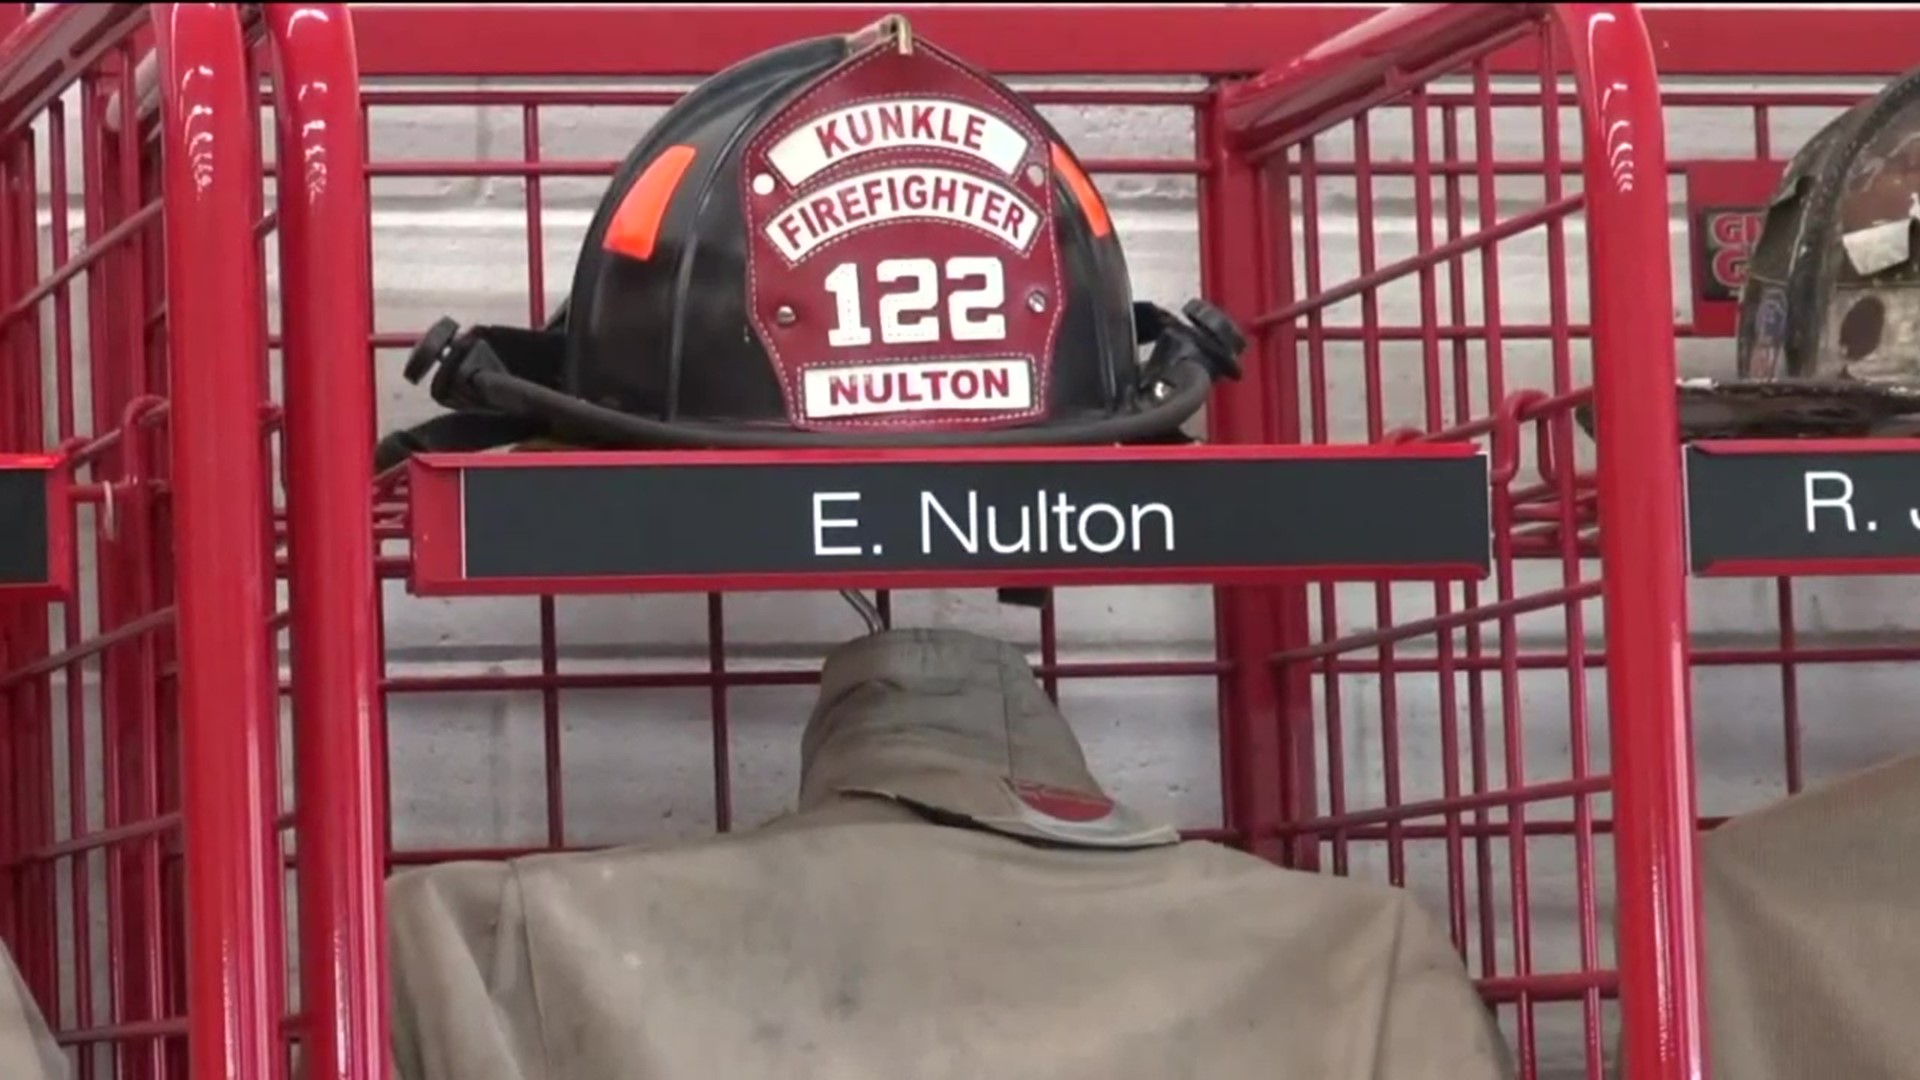 In honor of Ed Nulton, a former volunteer Kunkle firefighter, a stretch of highway will be named in his memory where his fire service ended.